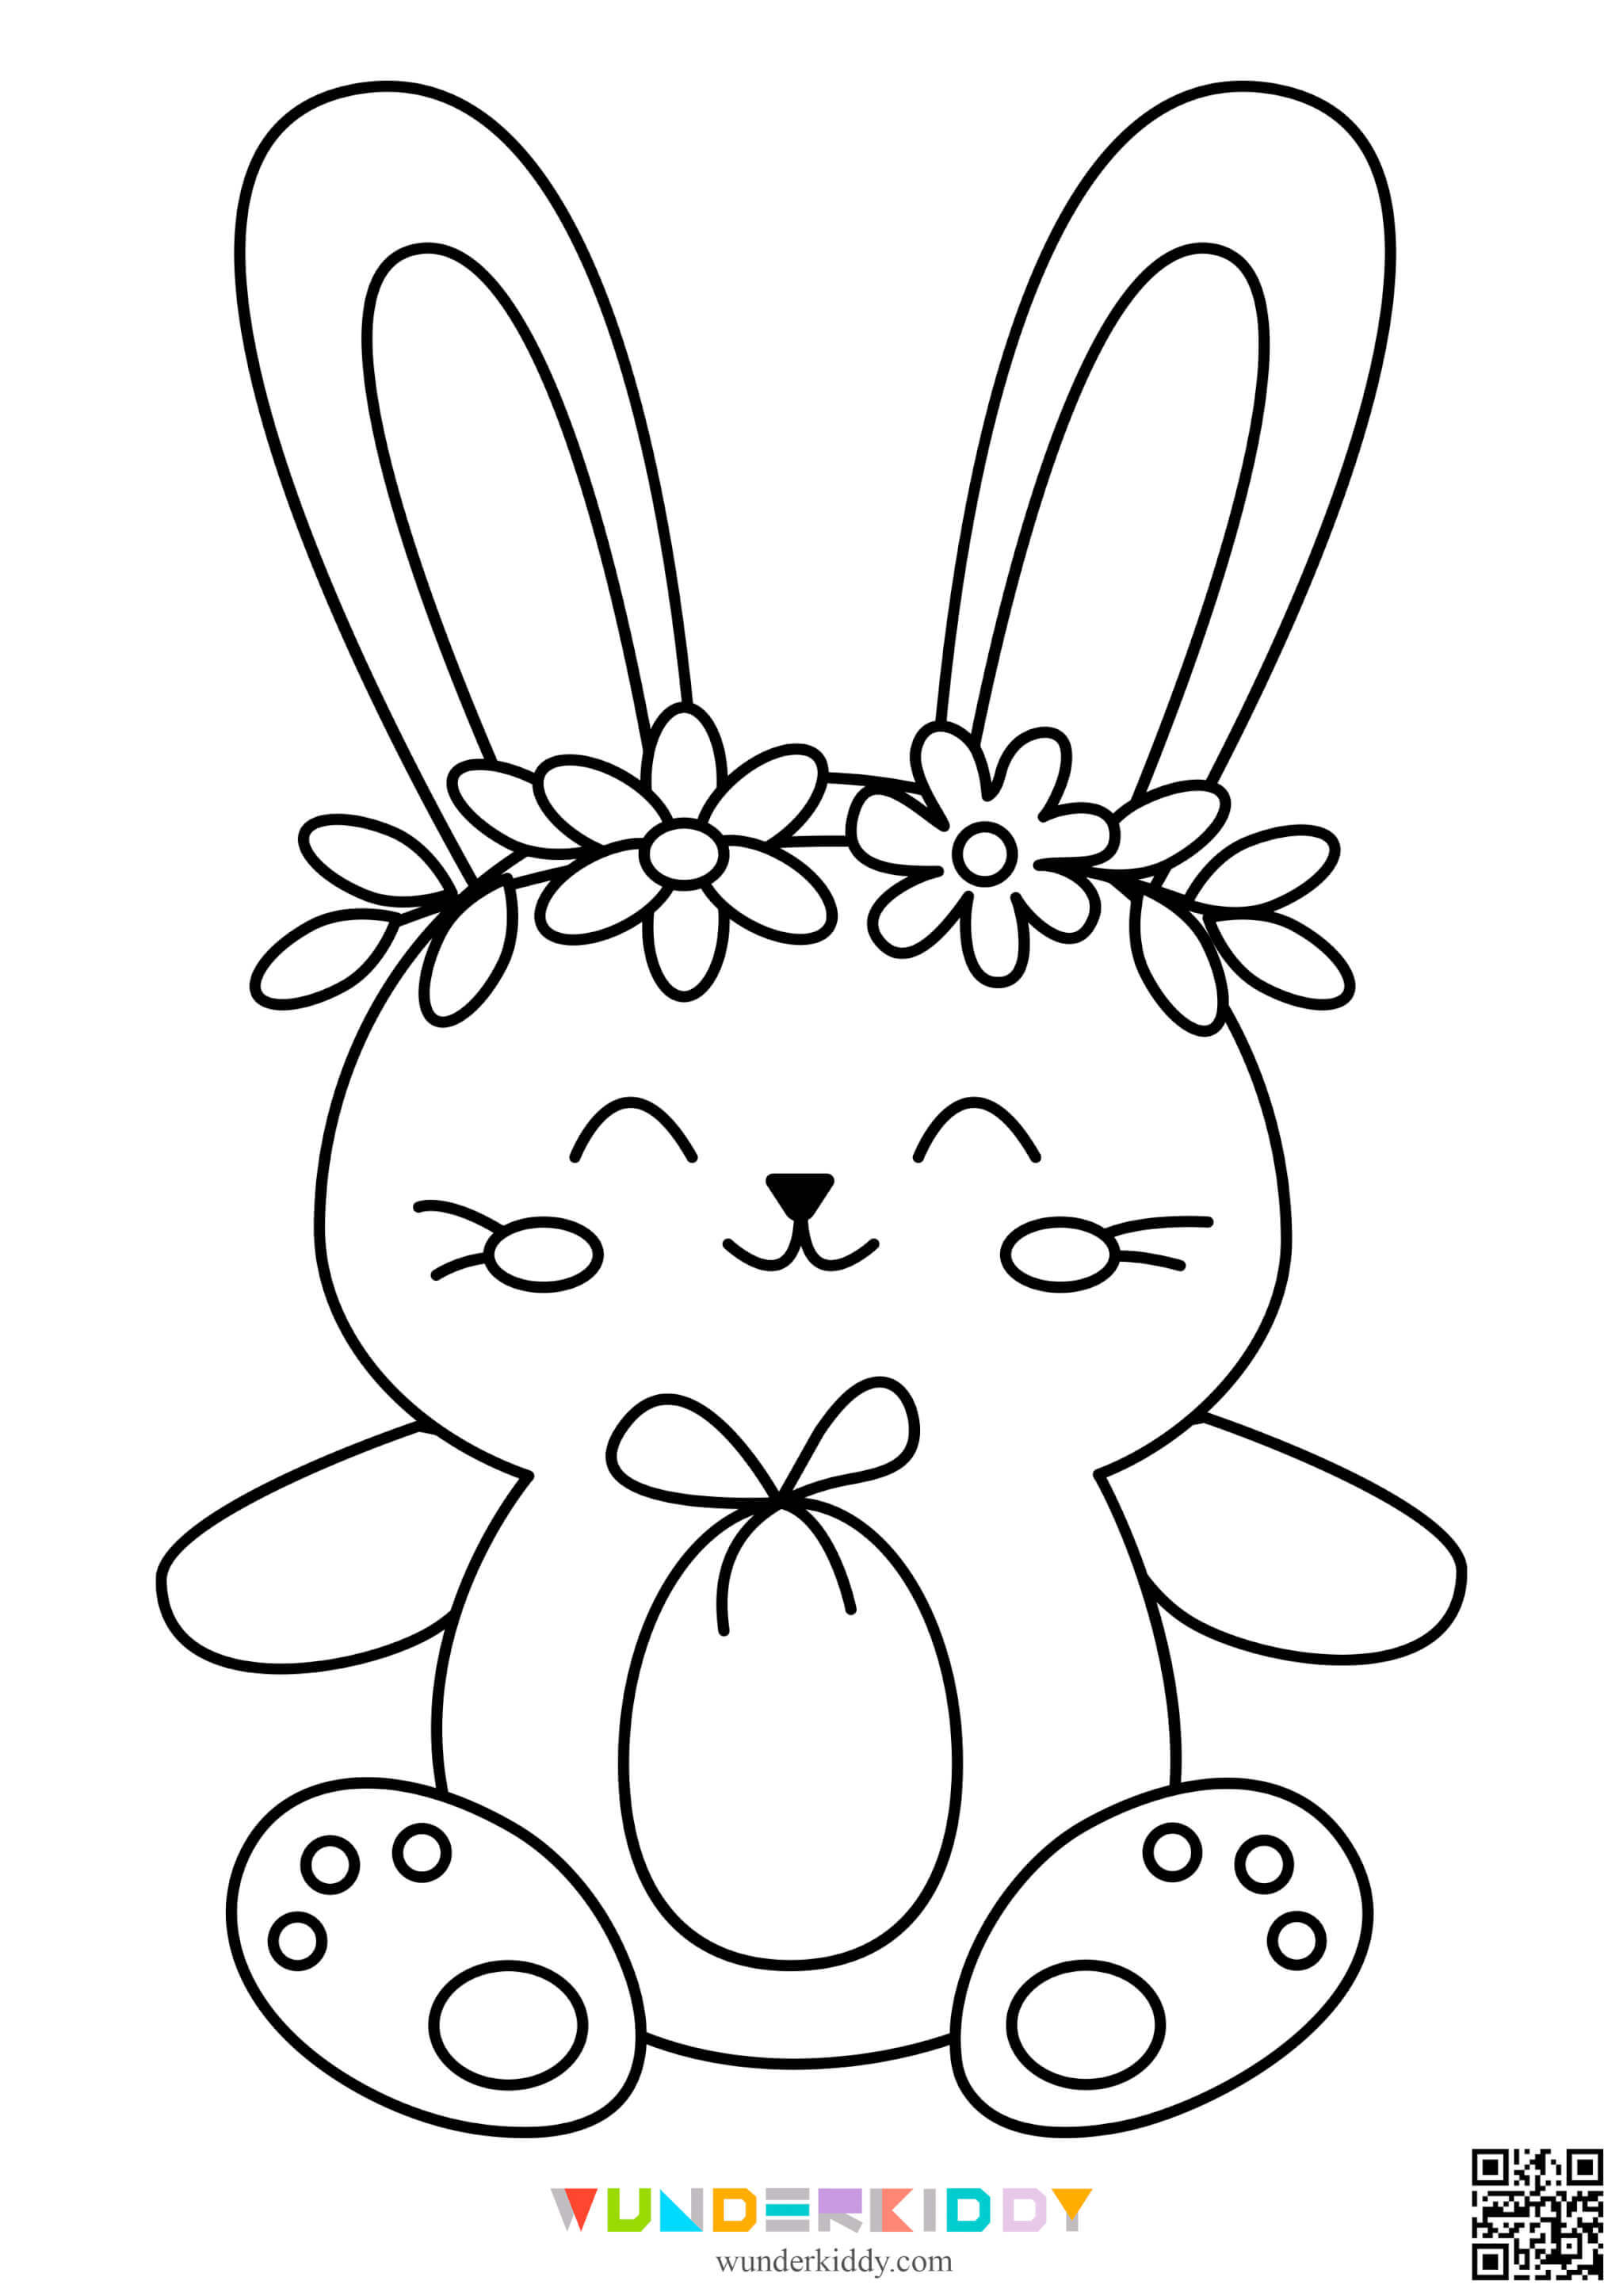 Easter Eggs Coloring Pages - Image 8